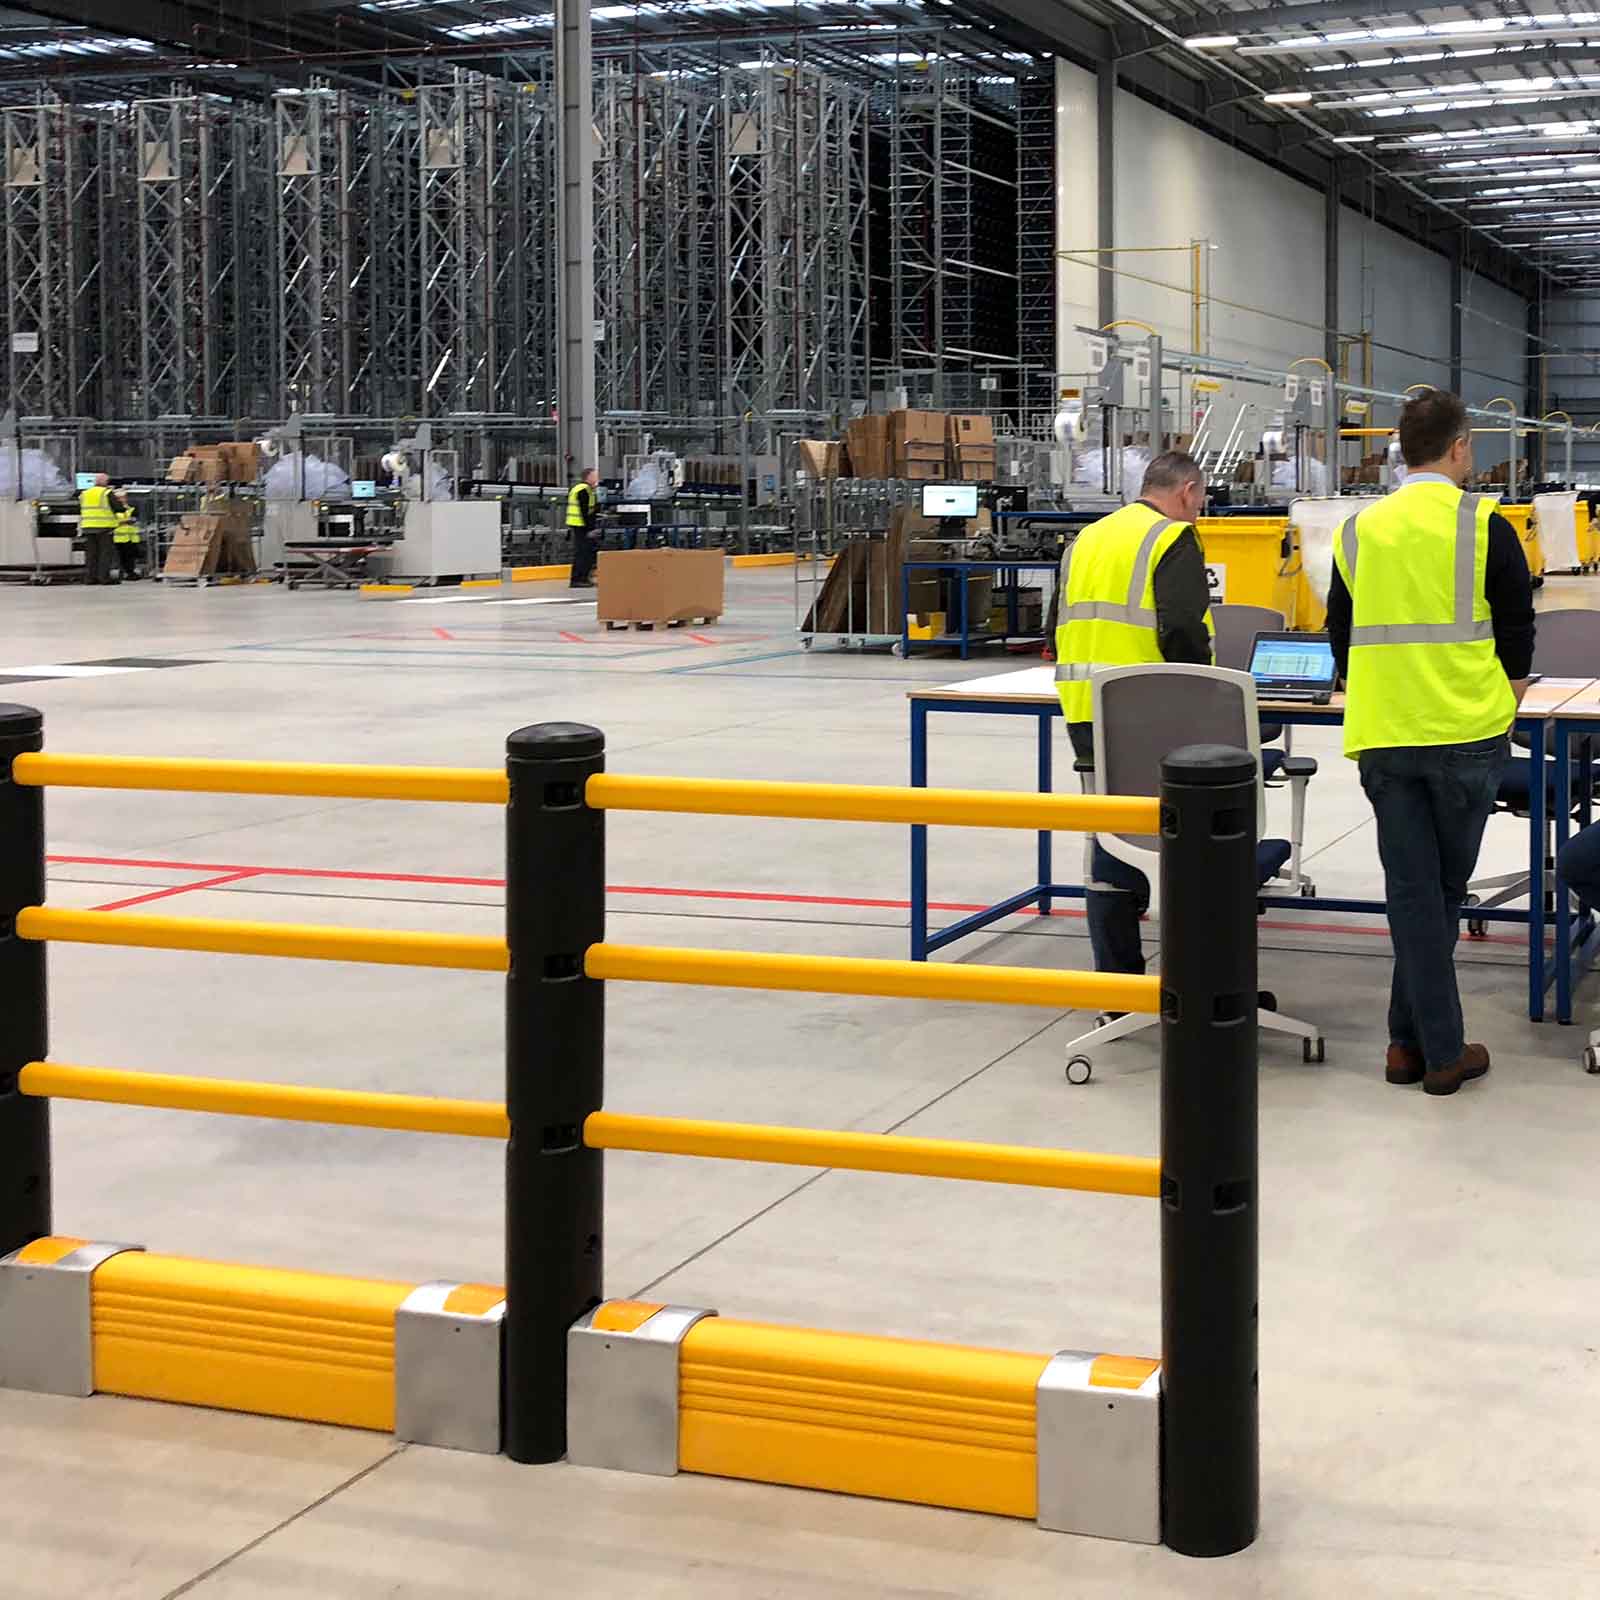 McCue Pedestrian Barrier Safety Protection with Floor Mounted Crash Barrier in Warehouse